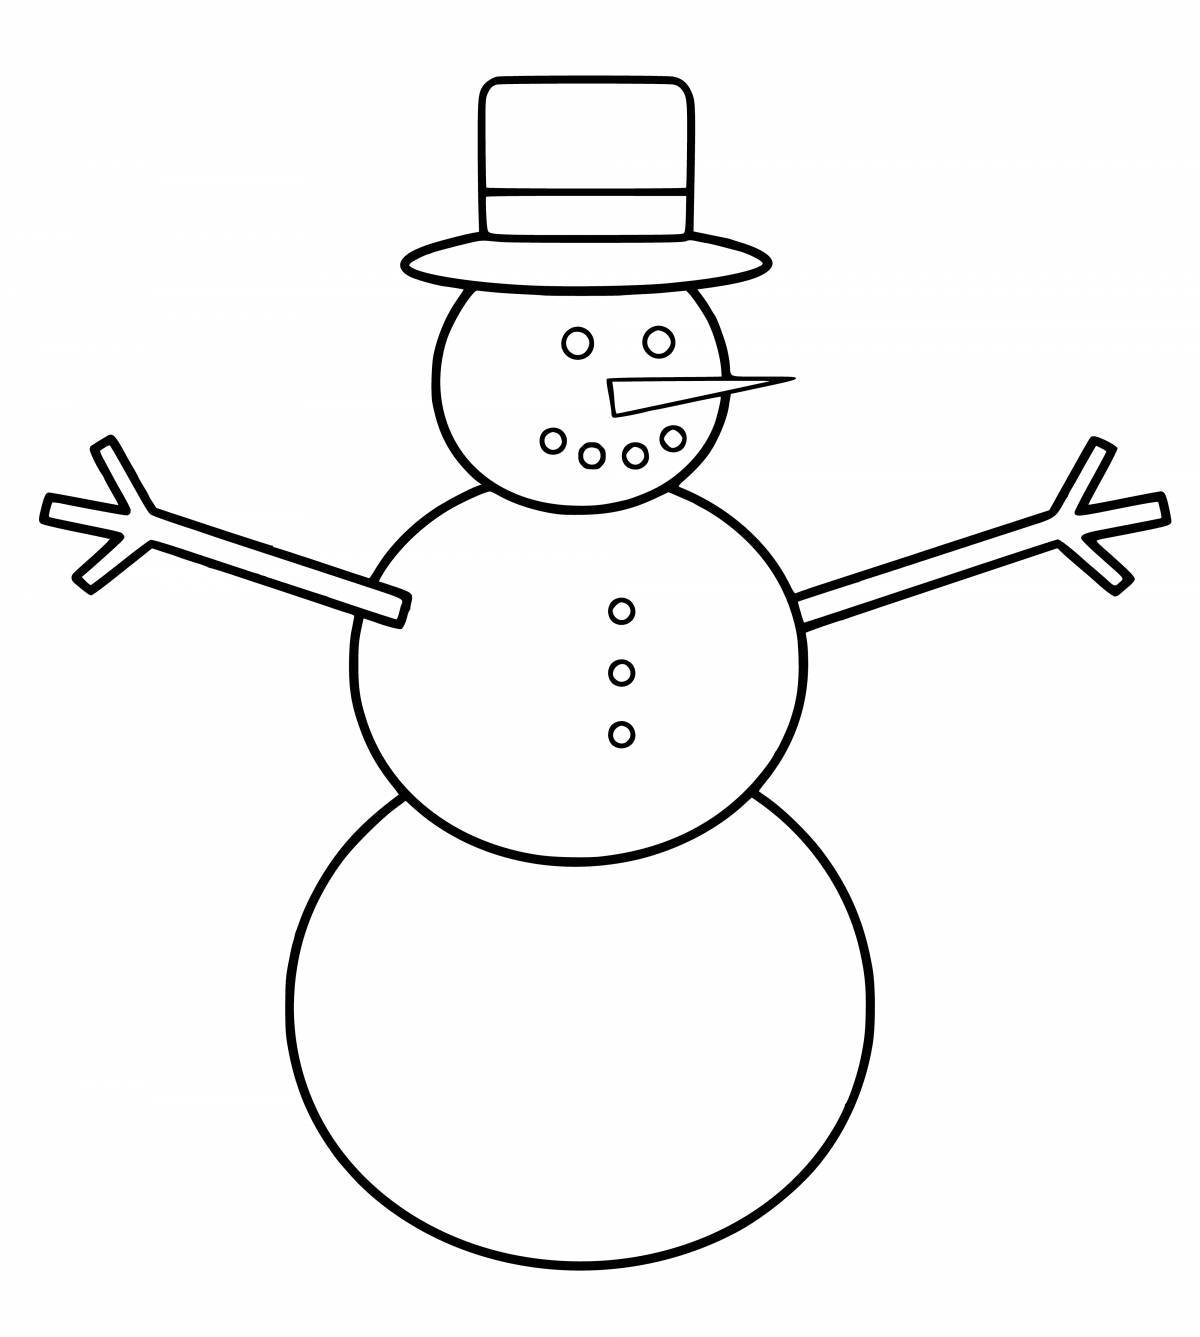 Glowing snowman coloring book for kids